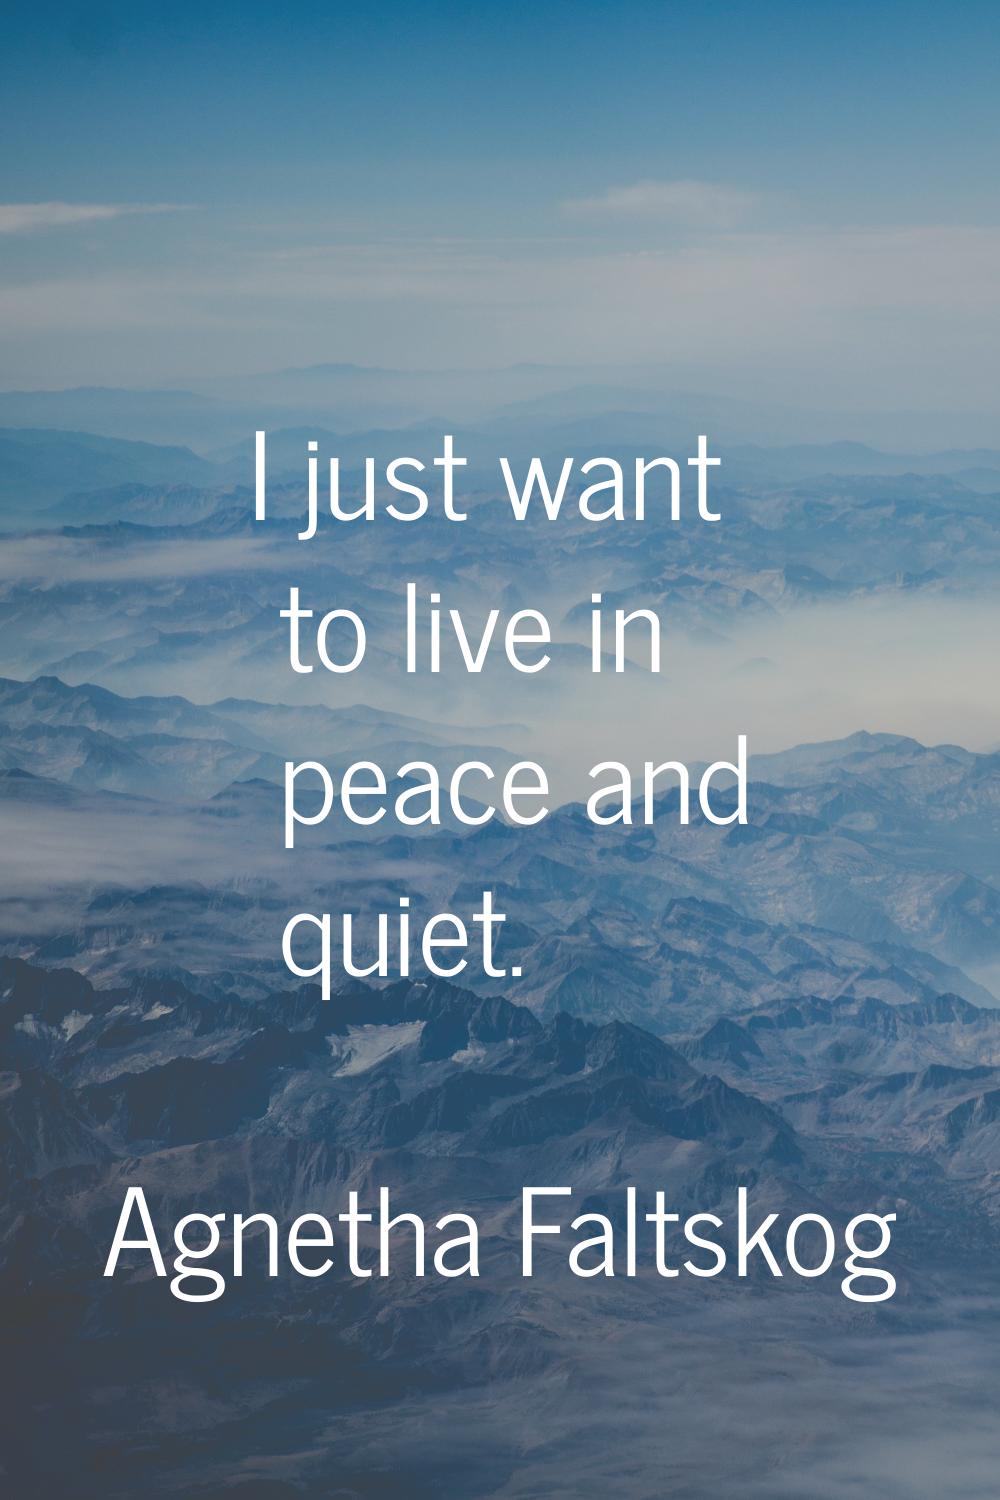 I just want to live in peace and quiet.